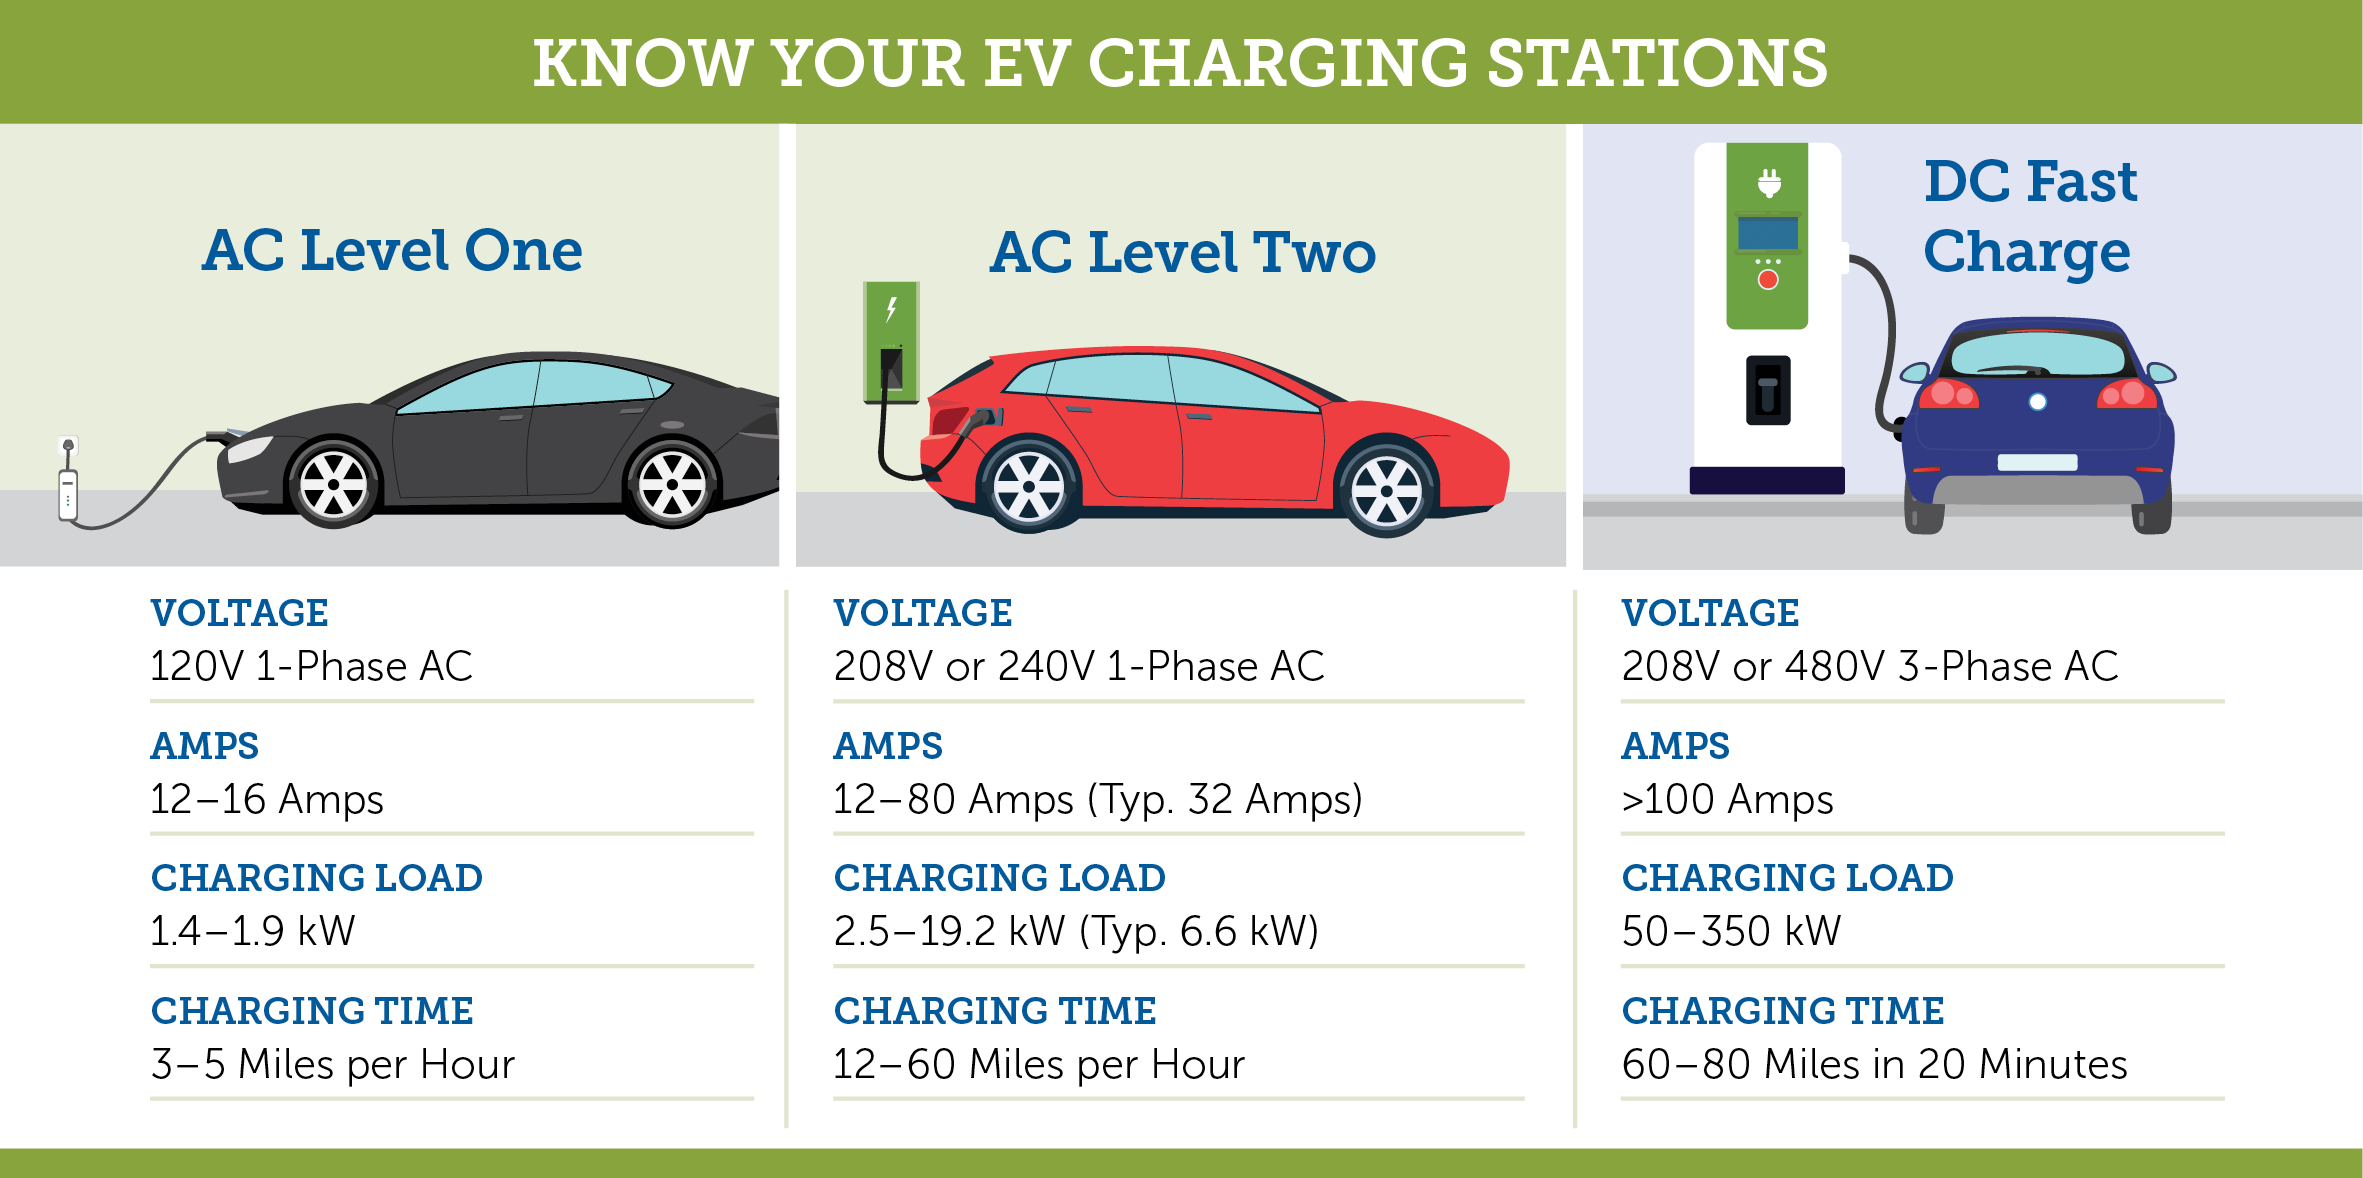 How Long Does It Take To Charge an Electric Car? — EV Connect